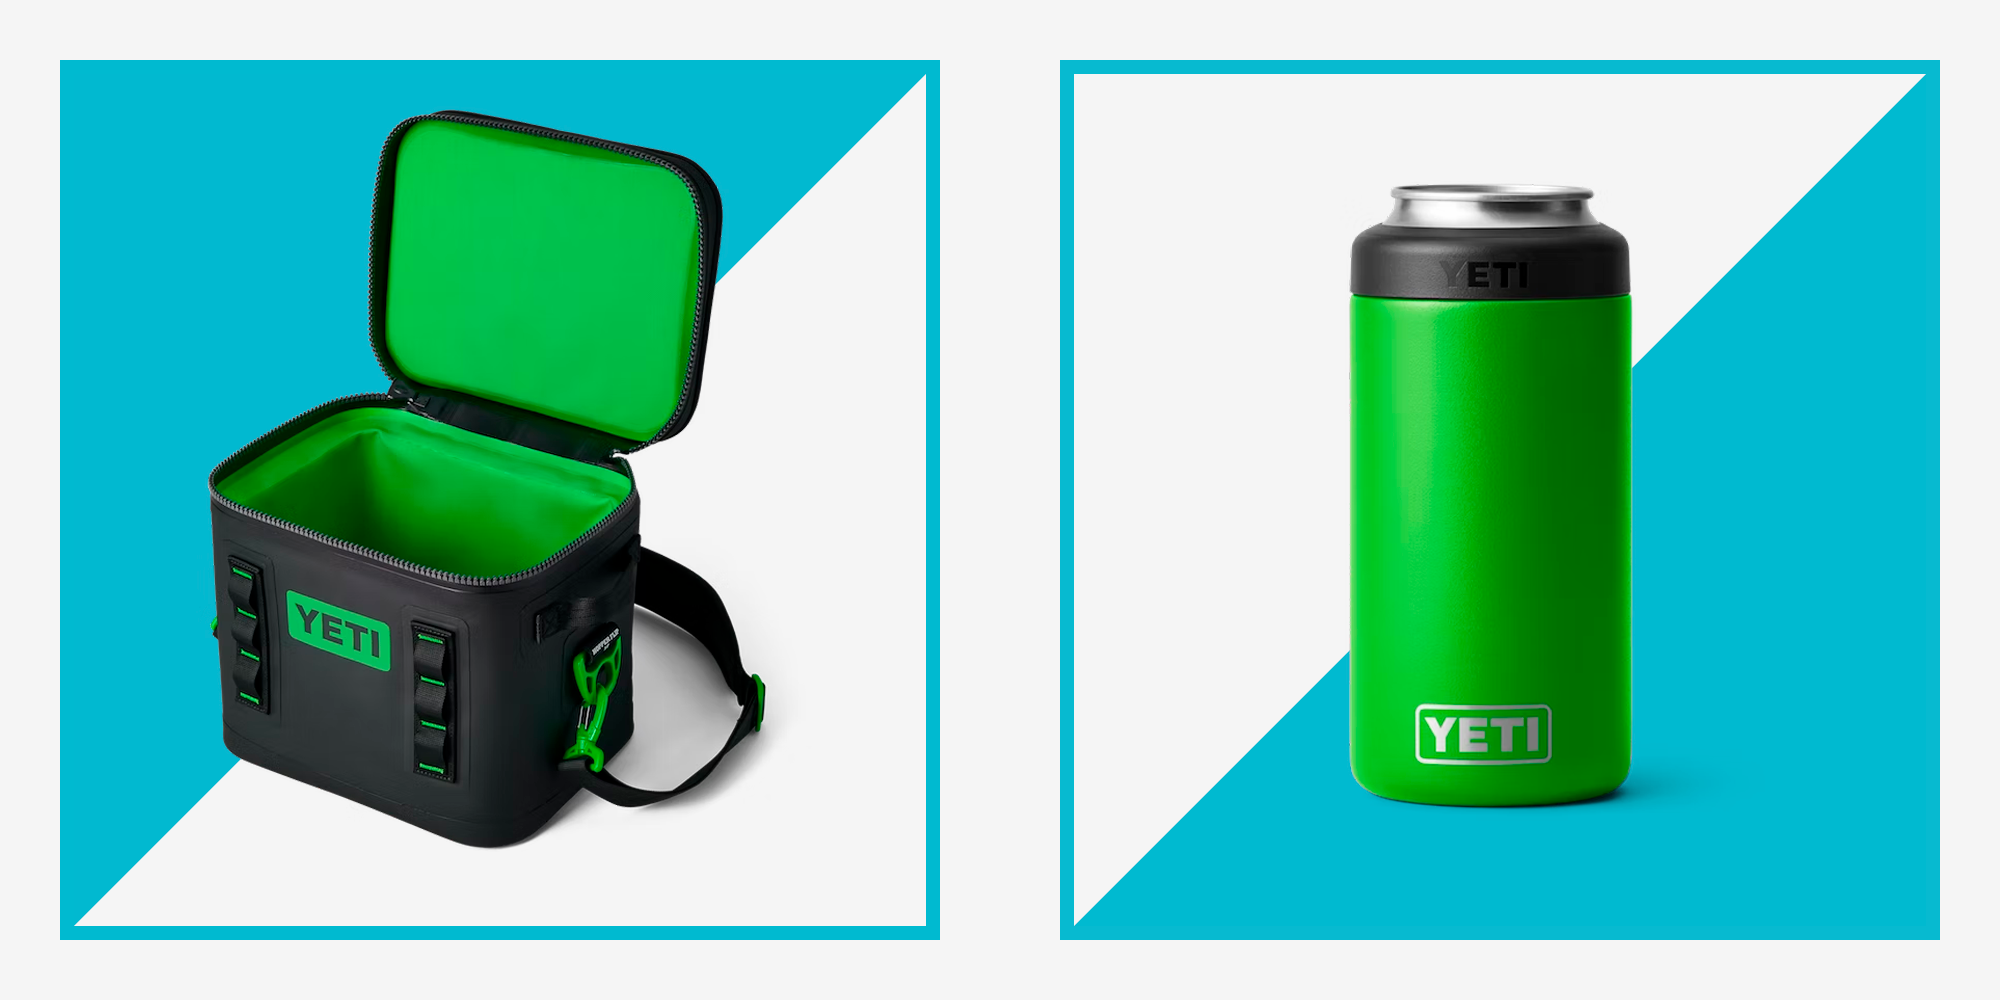 Yeti's New Color Collection Is Perfect for St. Patrick's Day